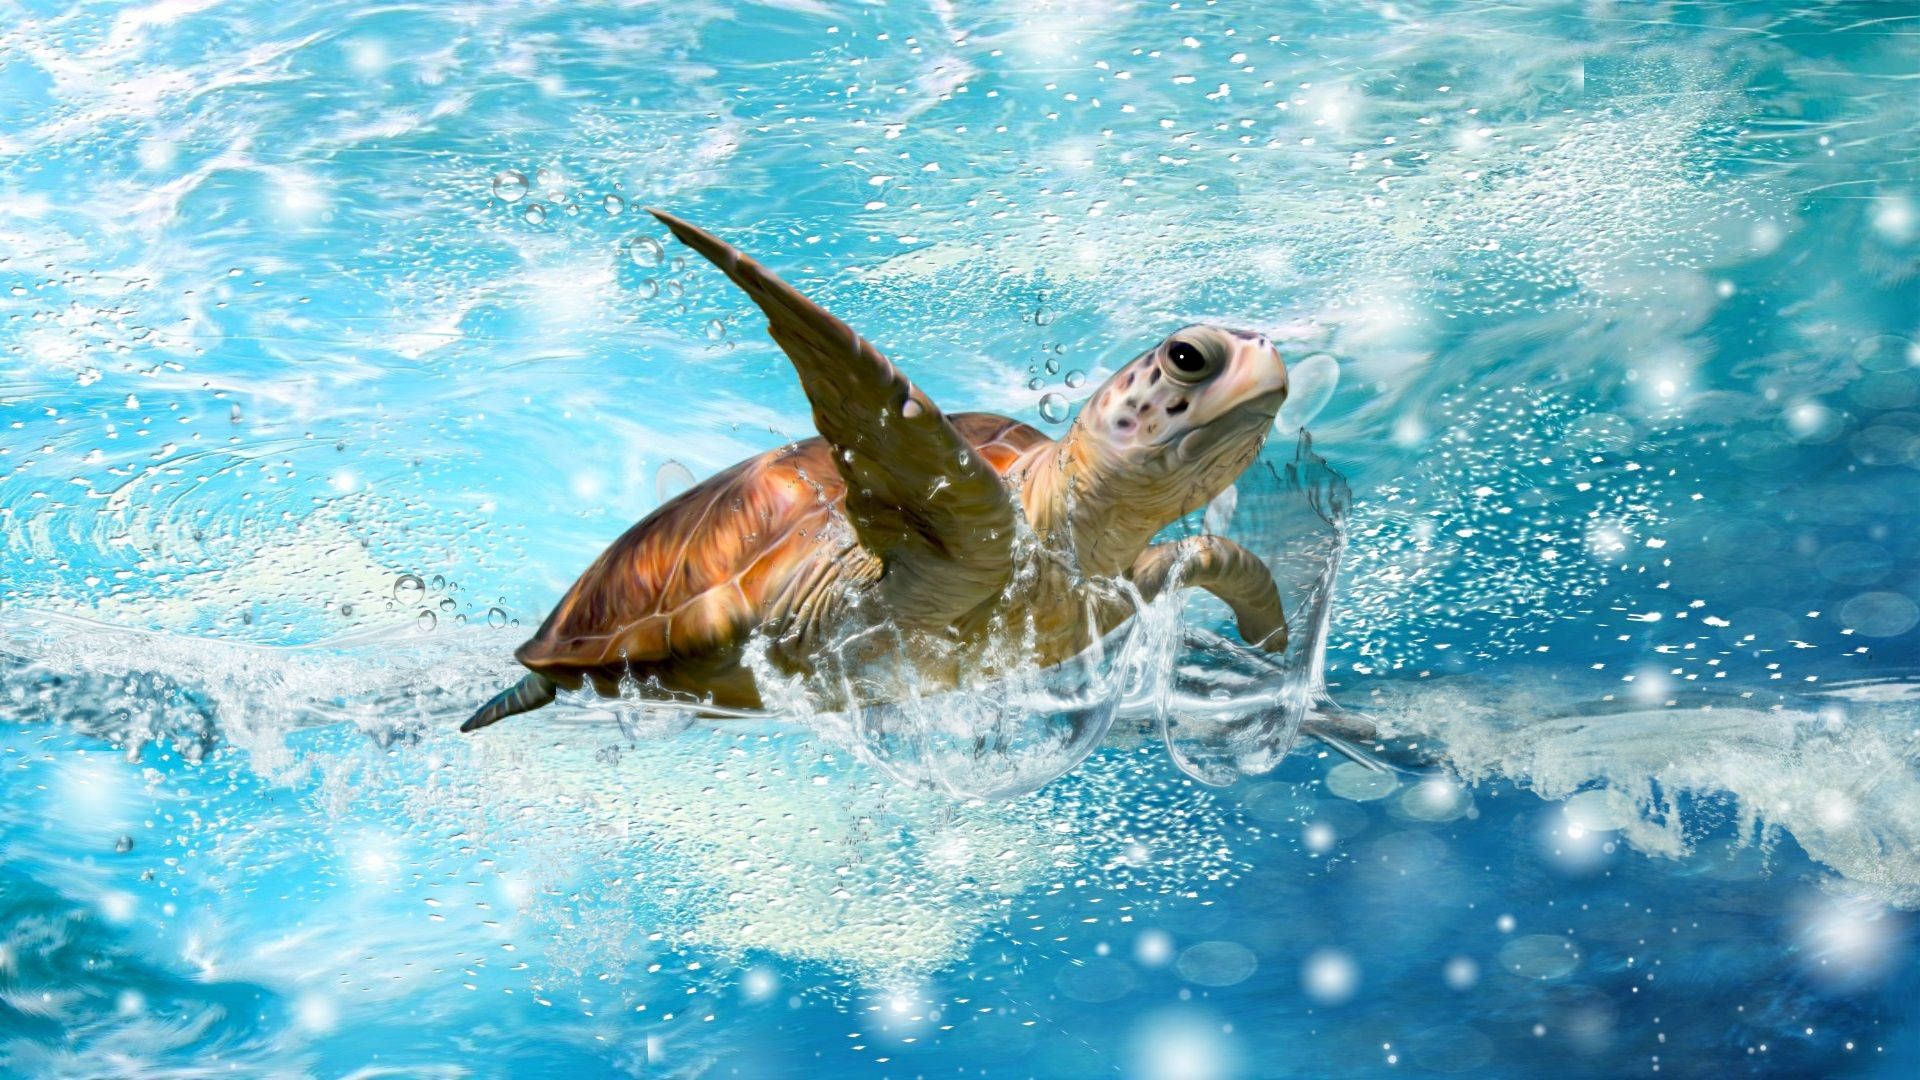 A turtle swimming in the ocean with water splashing around it - Sea turtle, turtle